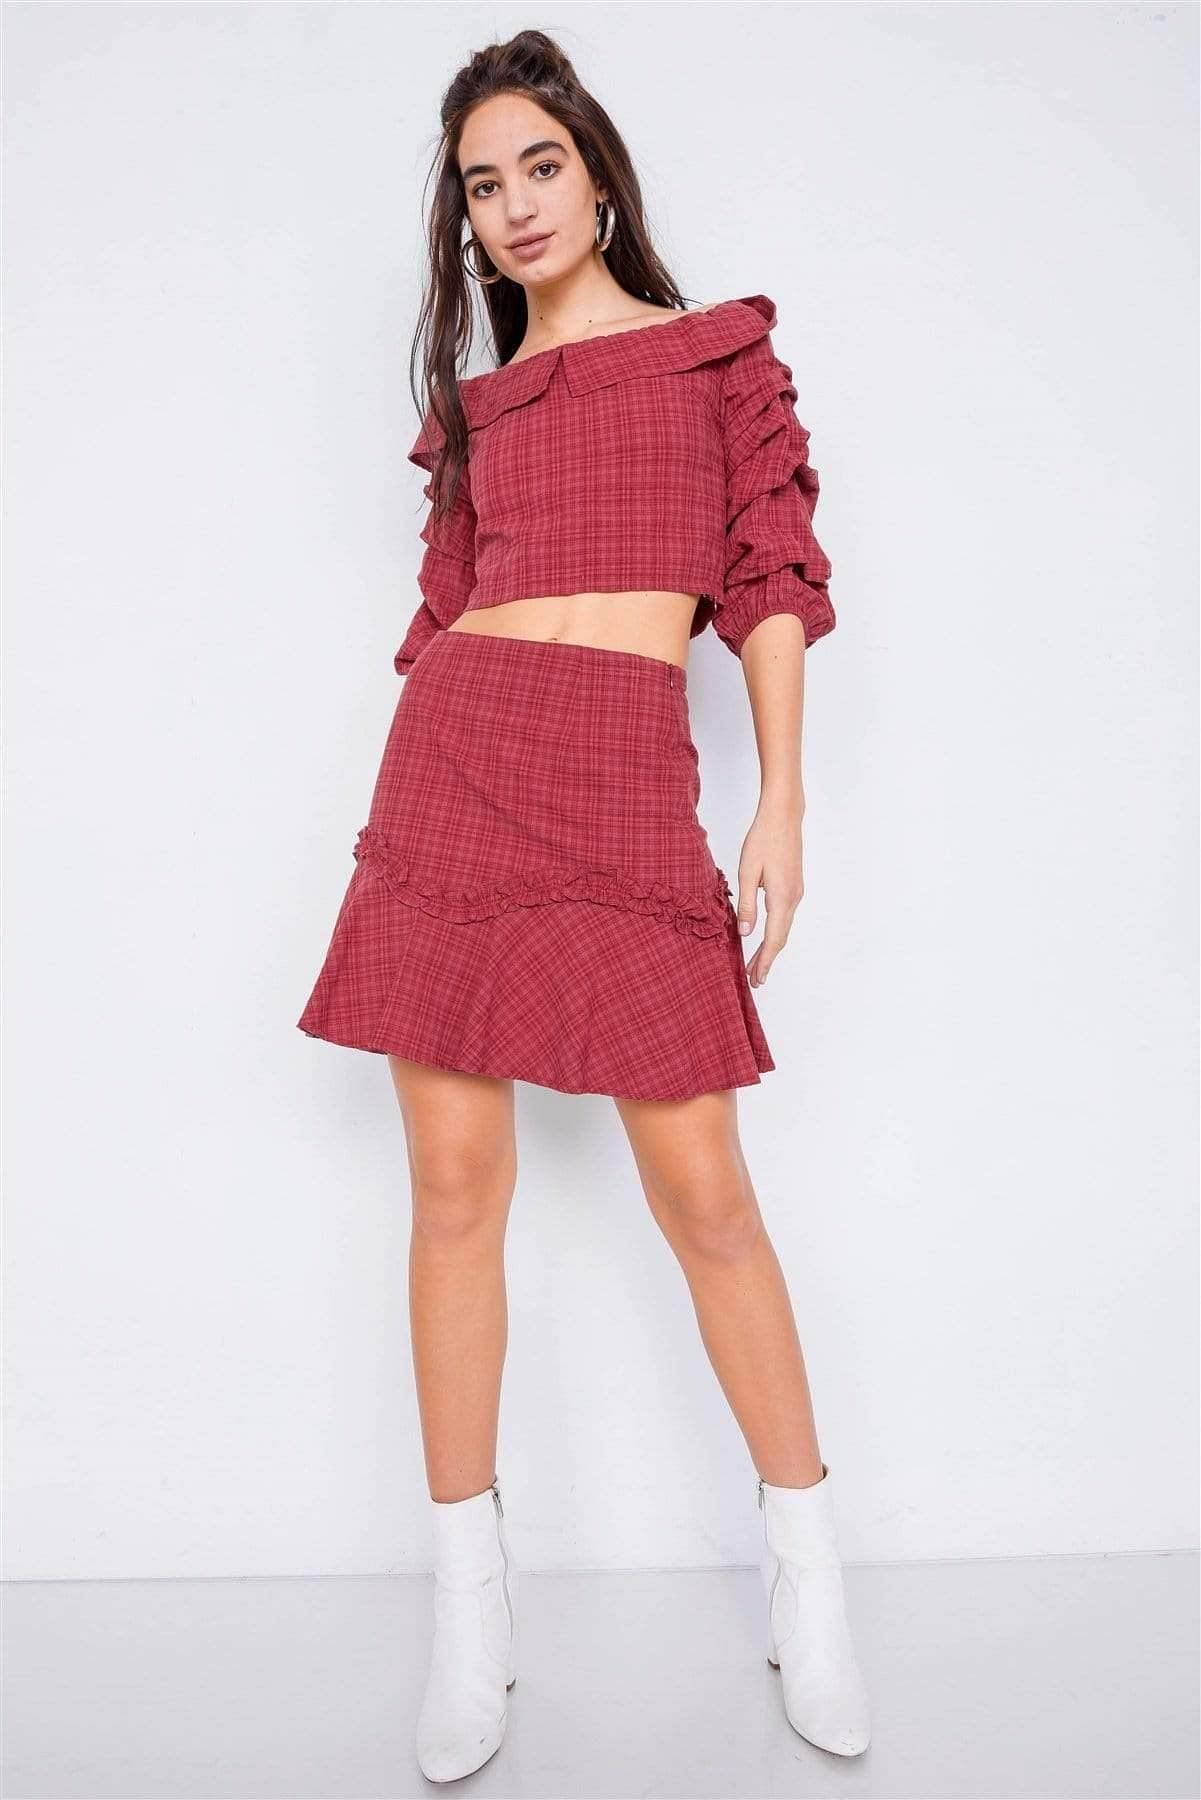 Raspberry Ruffle Sleeve Crop Top & Mini Skirt Set - Shopping Therapy, LLC Outfit Sets